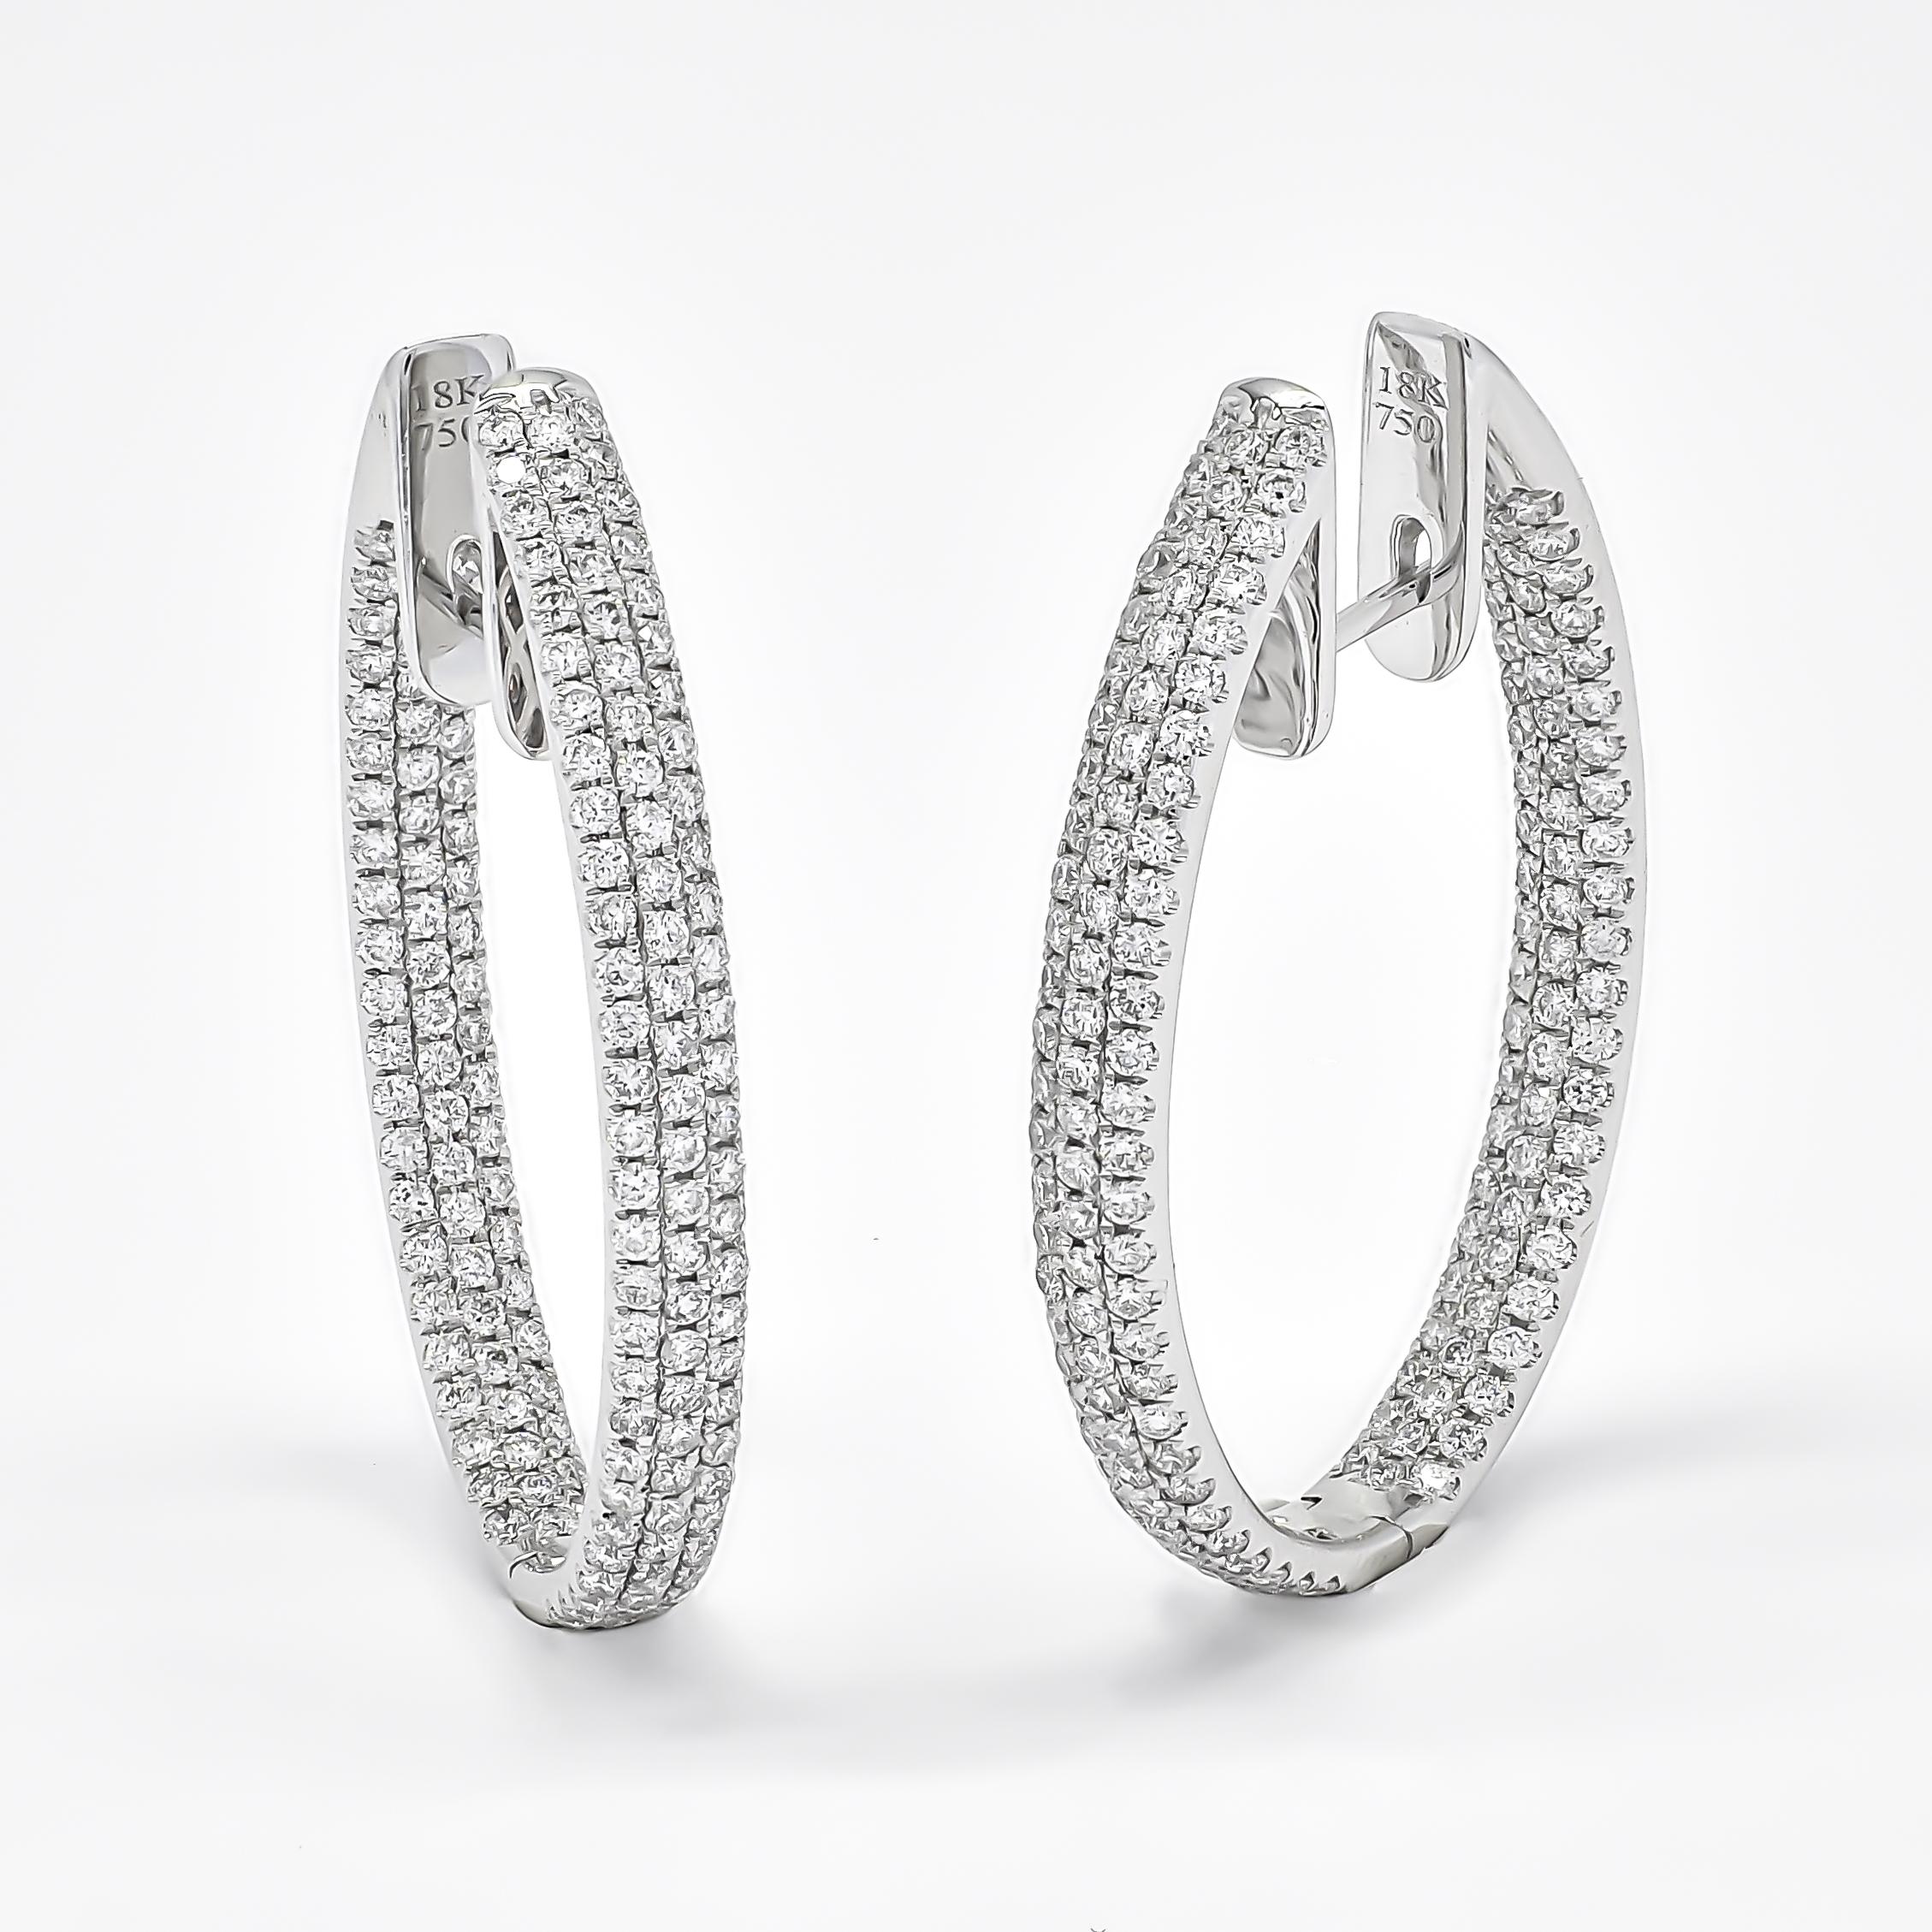 Immerse yourself in the sheer elegance of our Exclusive Designer Diamond Hoops, meticulously crafted with unparalleled attention to detail. These exquisite hoop earrings boast a captivating 